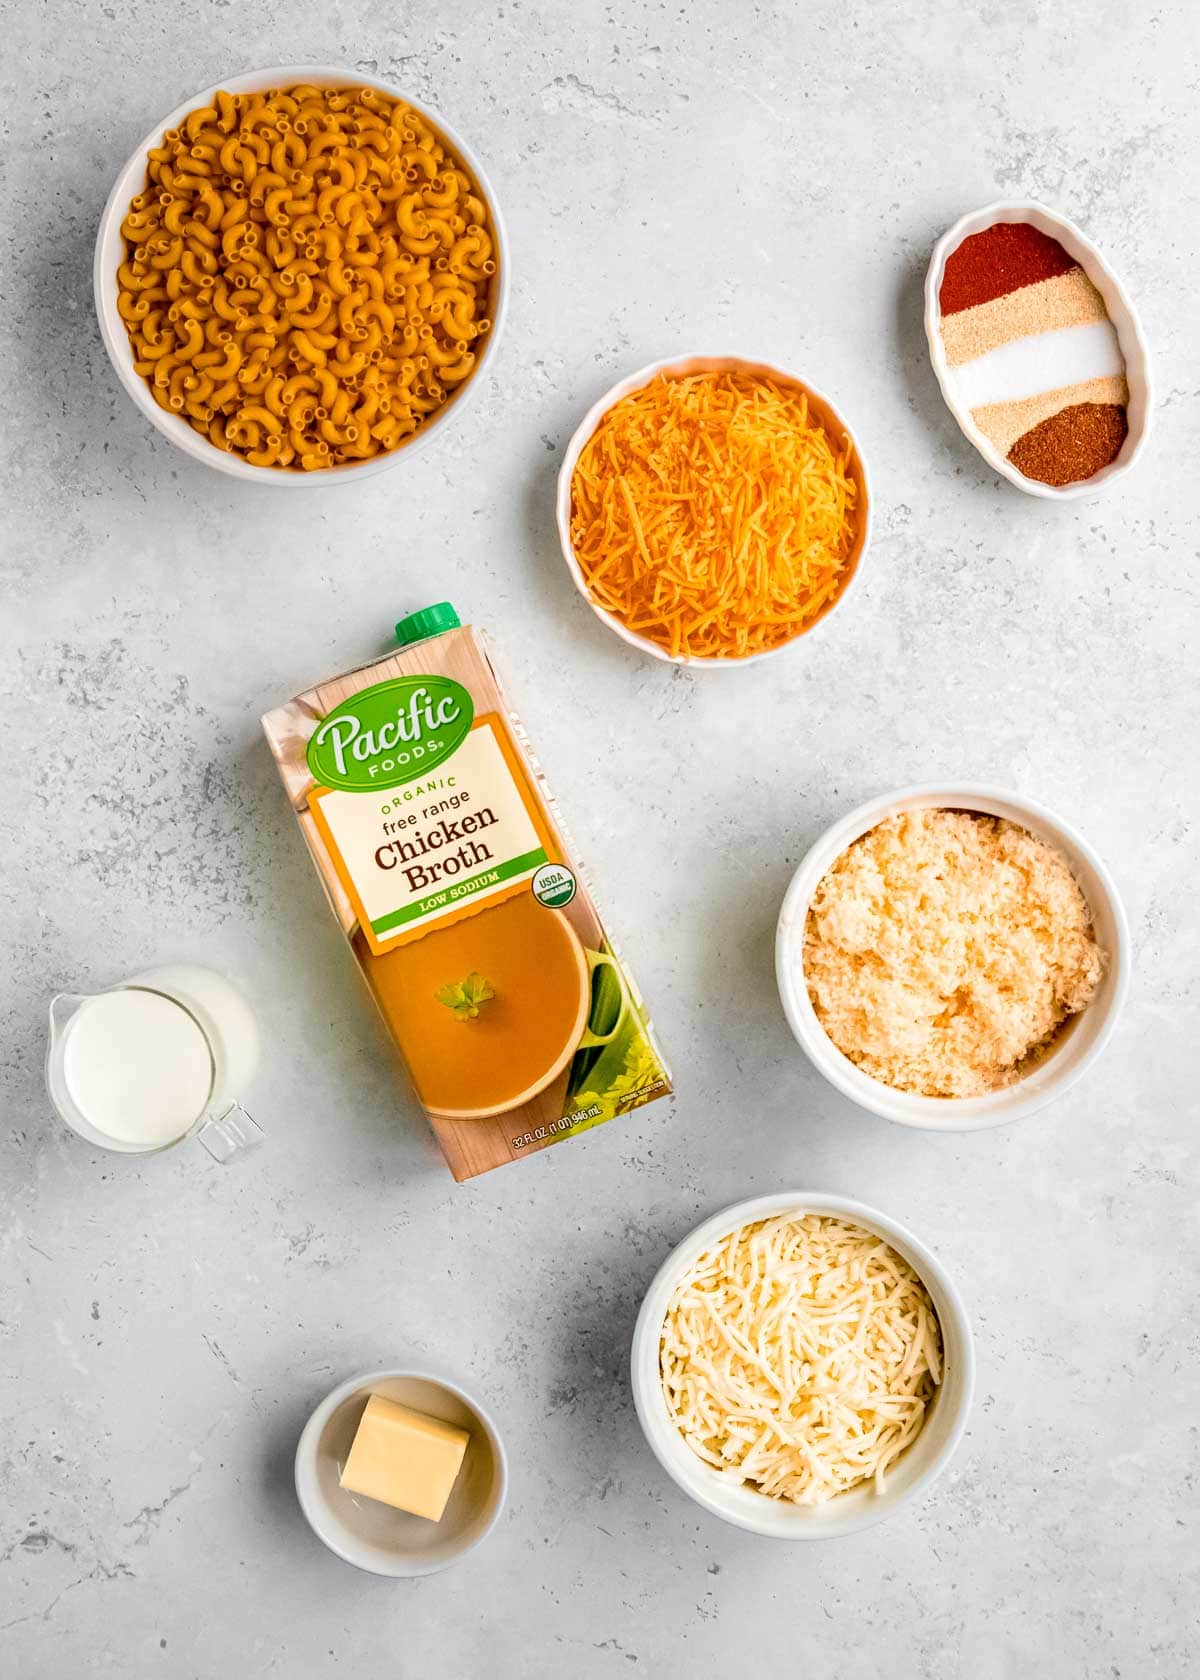 ingredients for instant pot mac and cheese